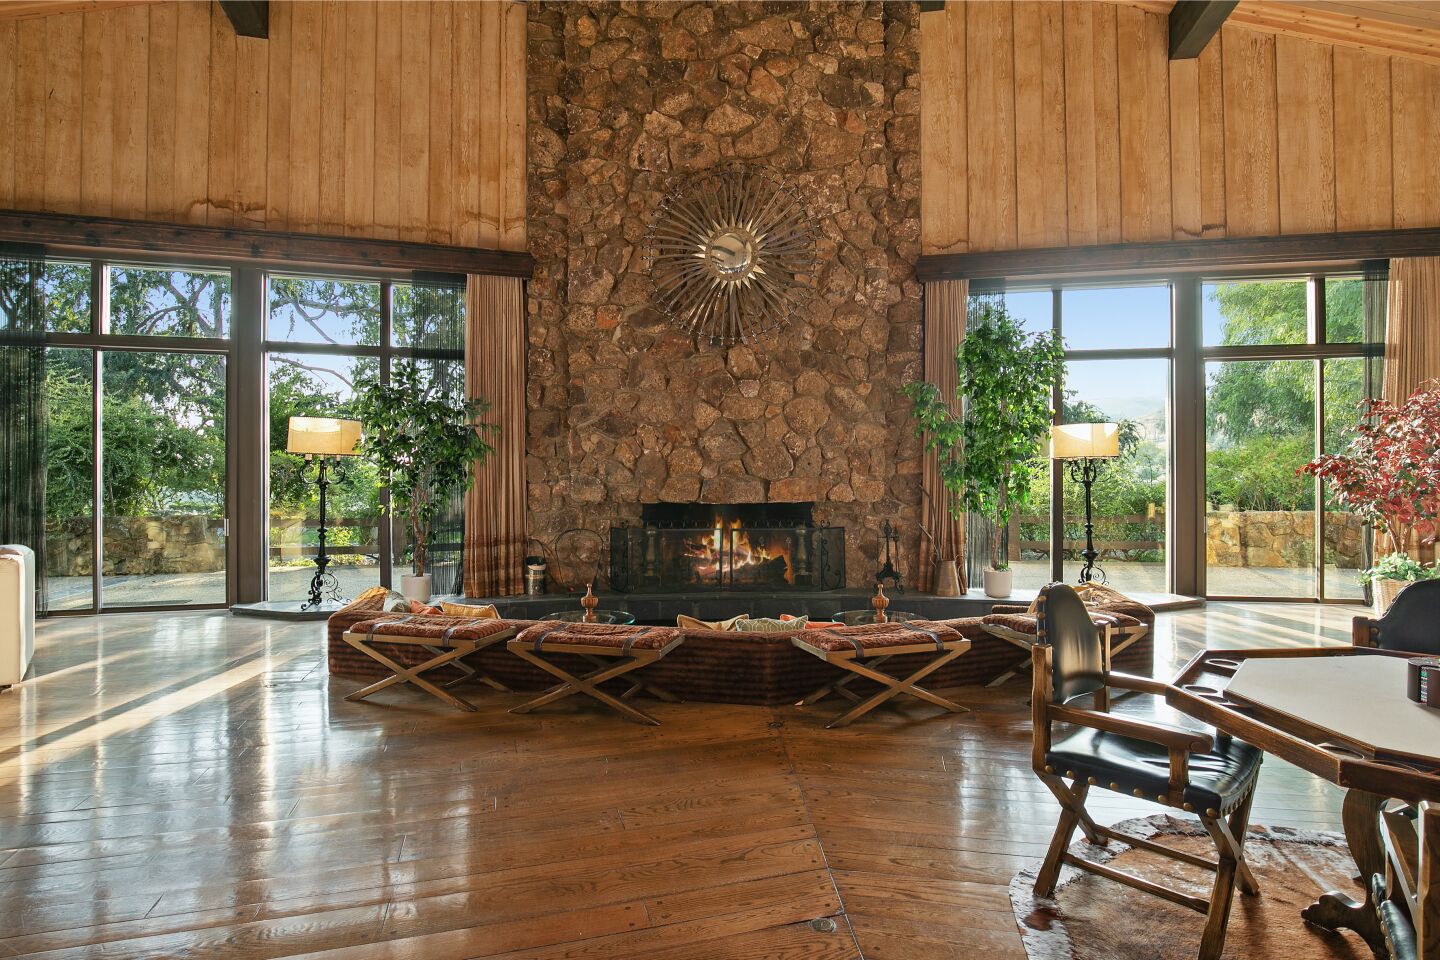 The stone fireplace.